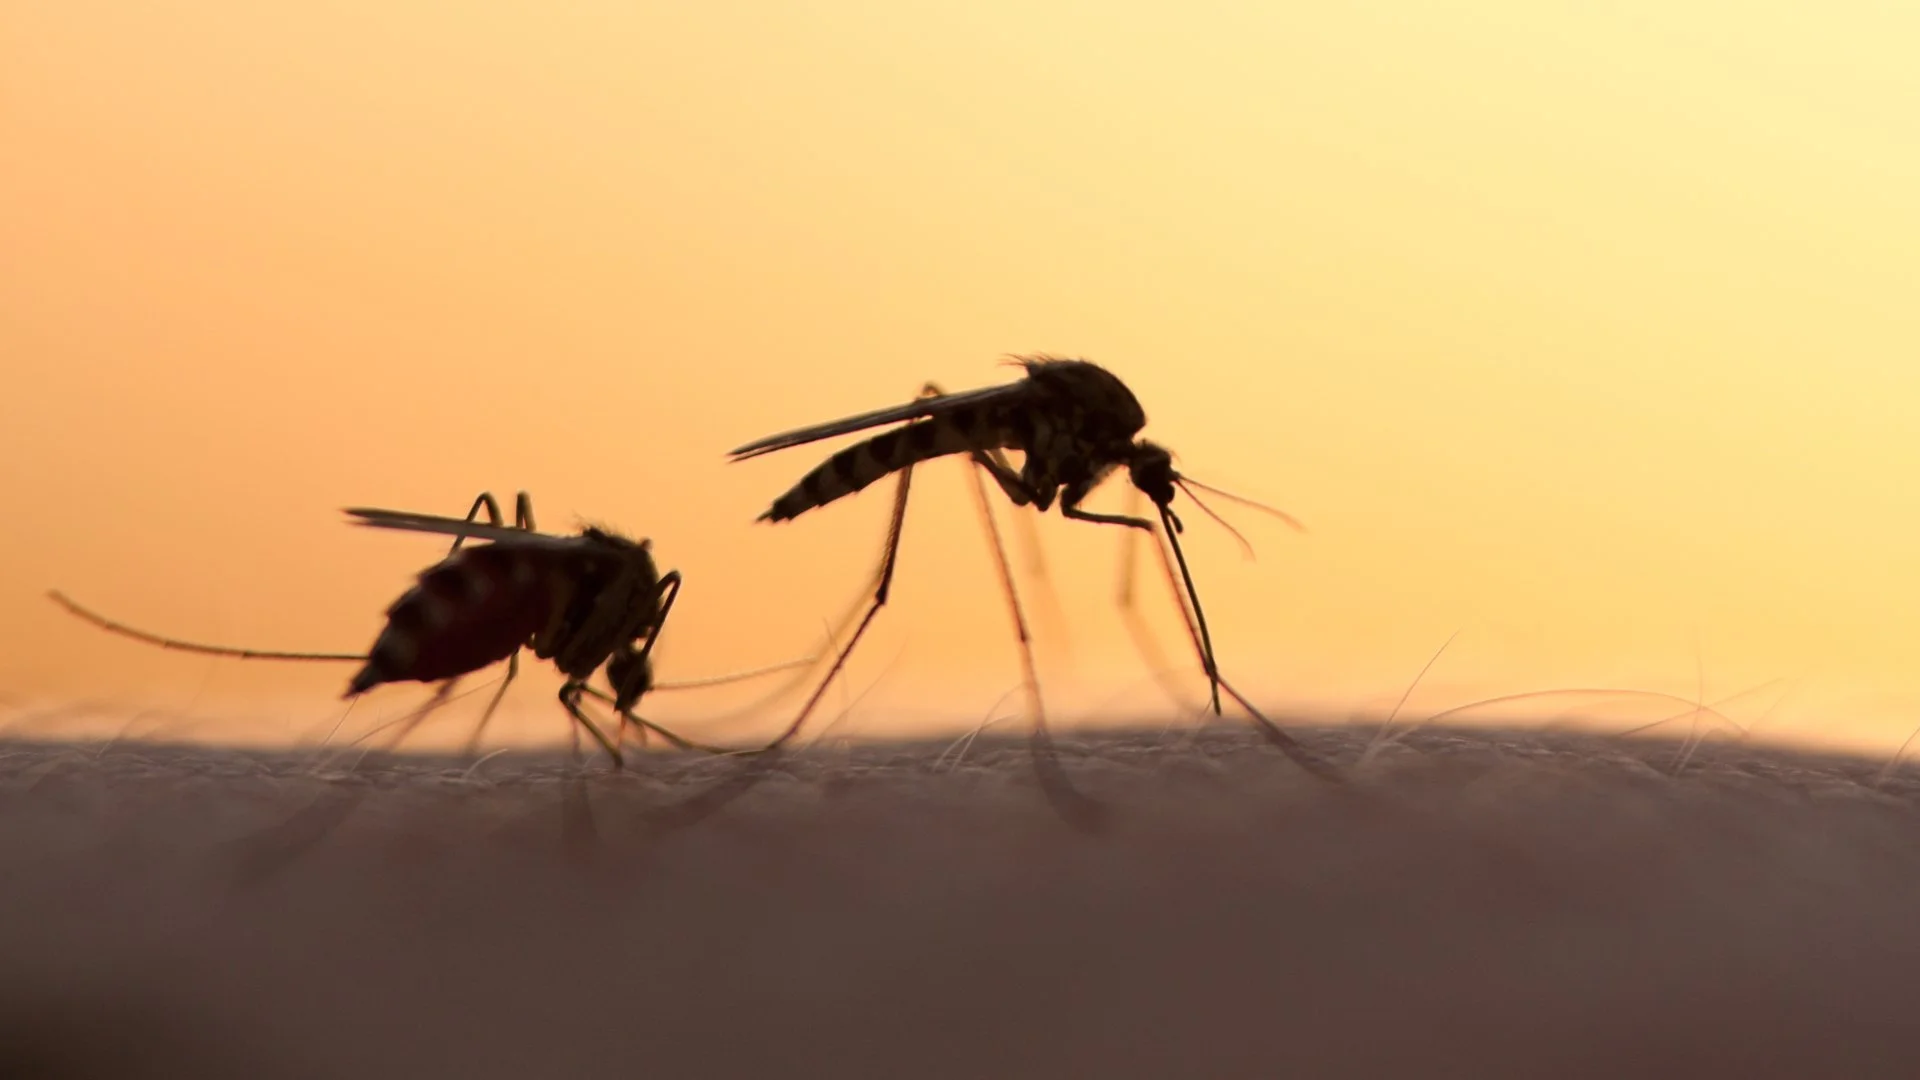 Mosquito Season Is Here - How Can You Protect Yourself & Your Family?